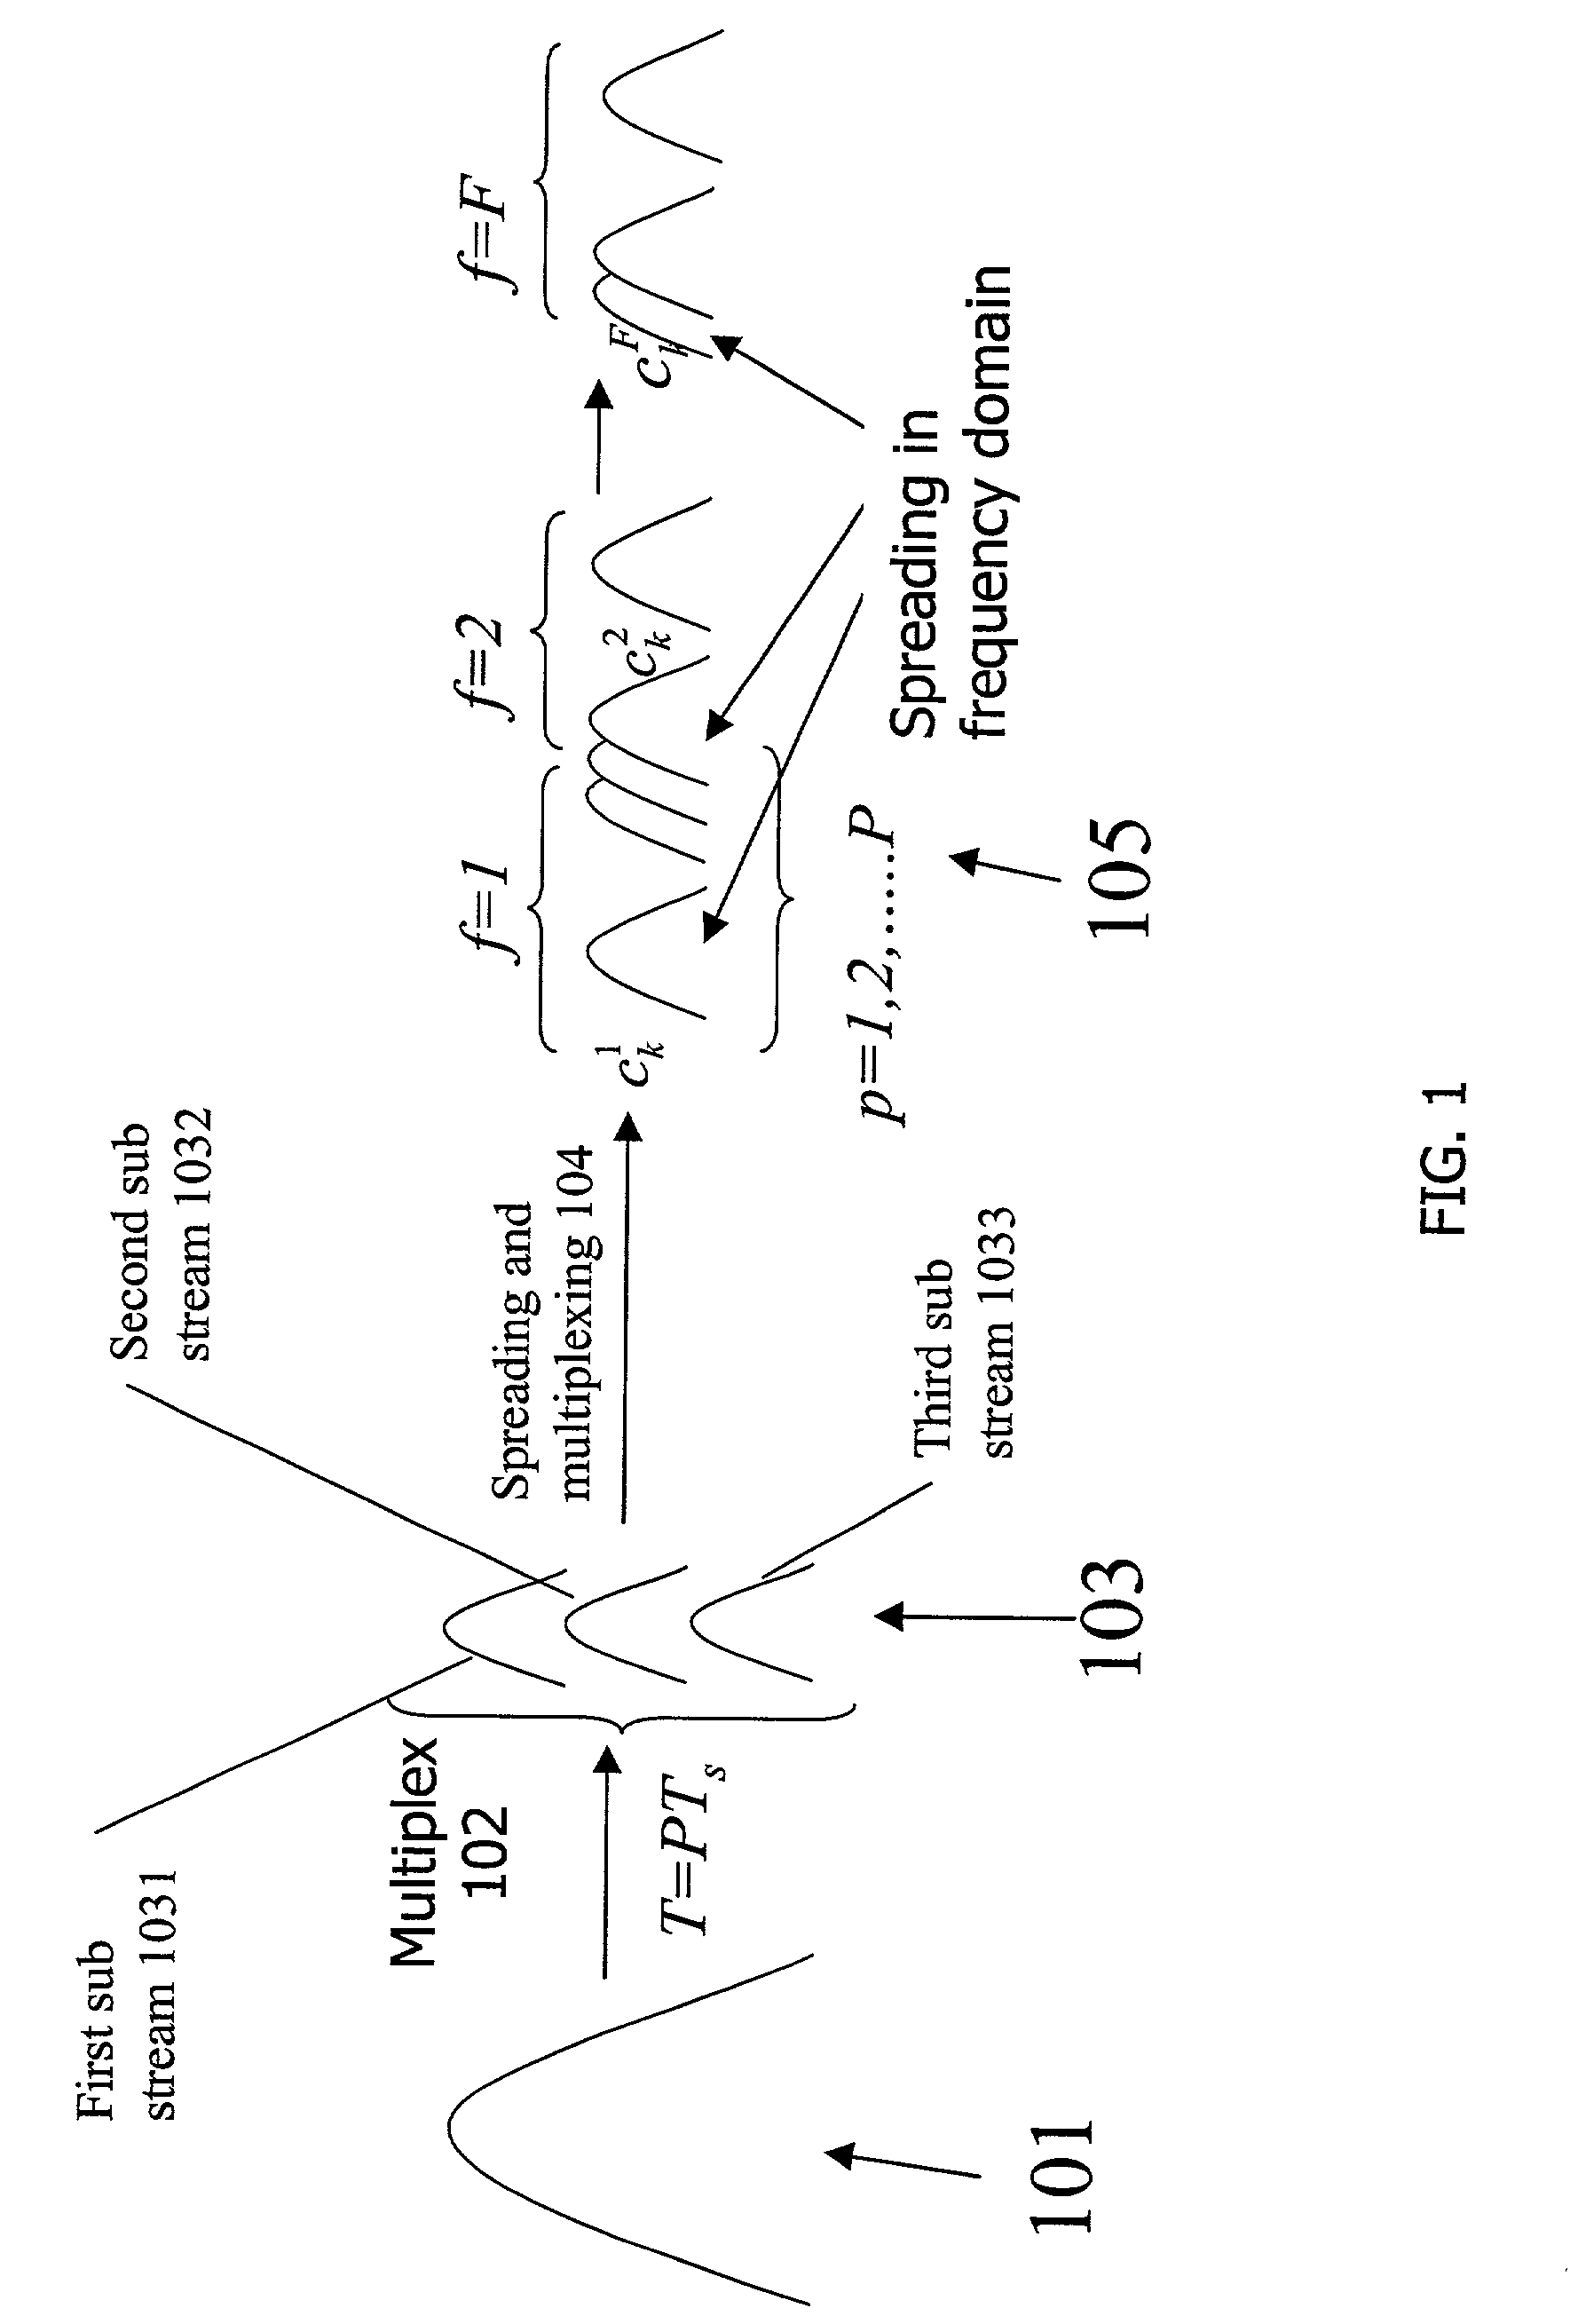 Programmable transceiver structure of multi-rate OFDM-CDMA for wireless multimedia communications